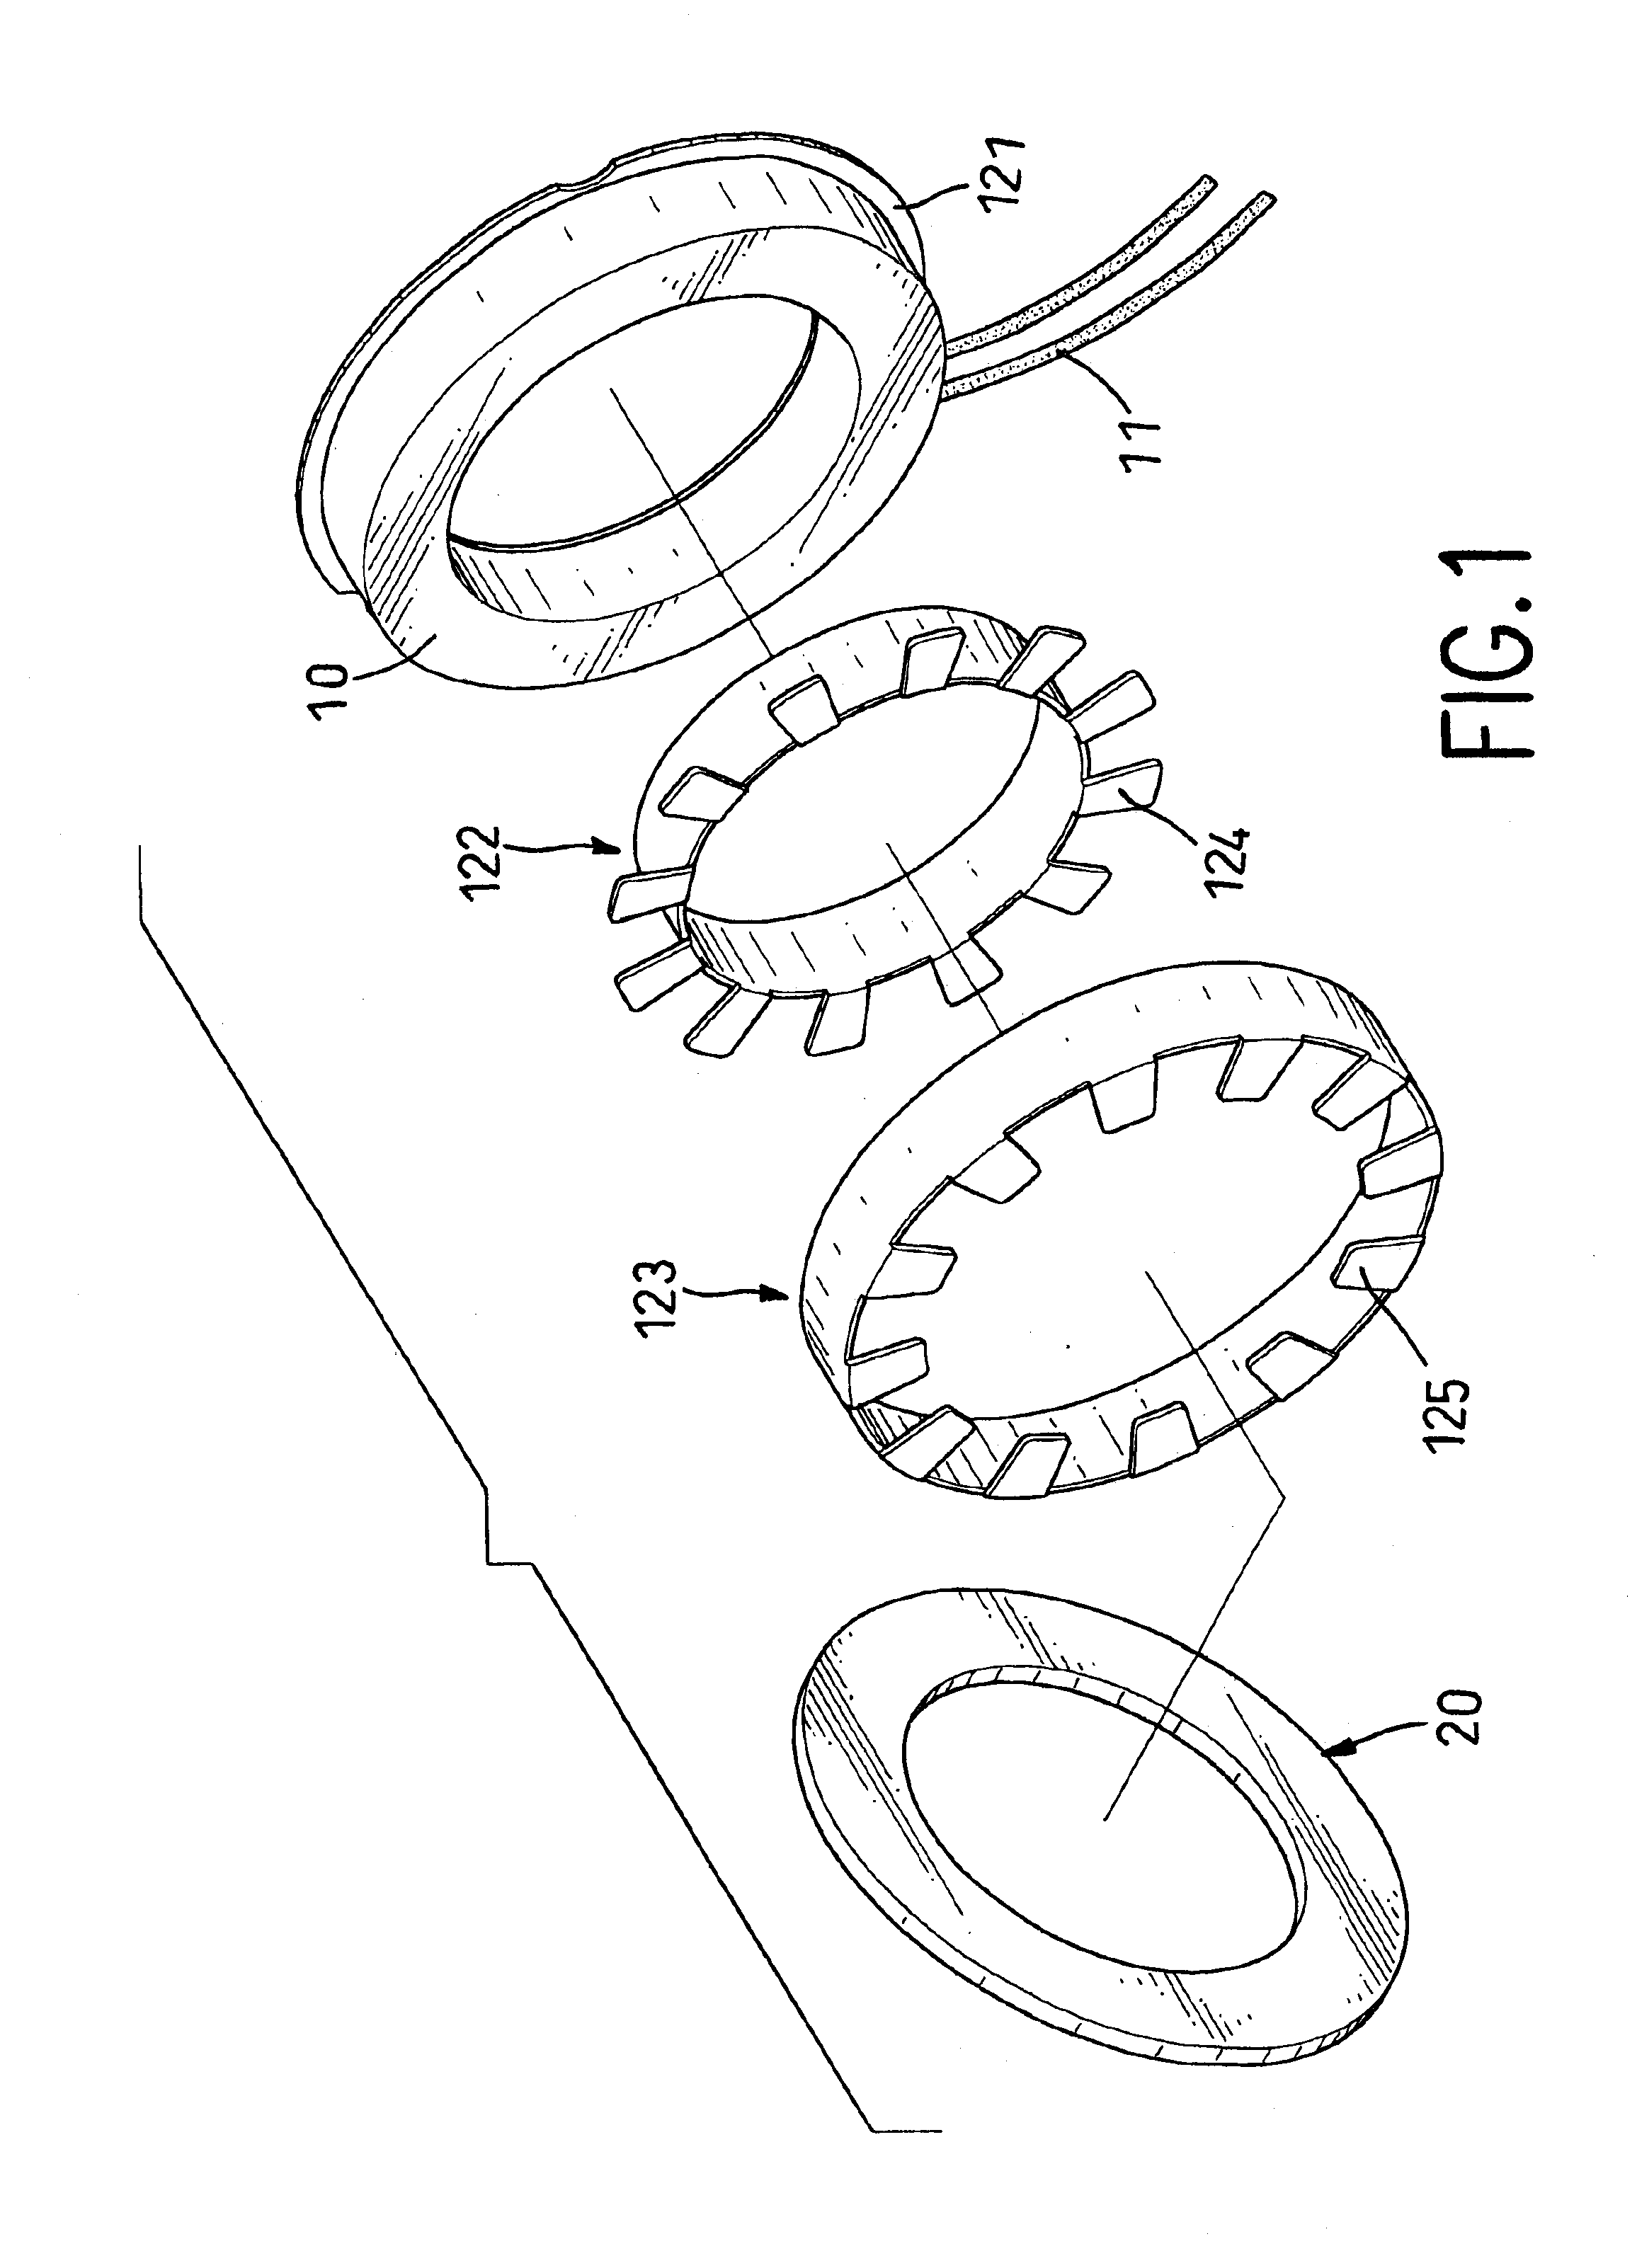 Electrical generator with separated coil and set of magnets